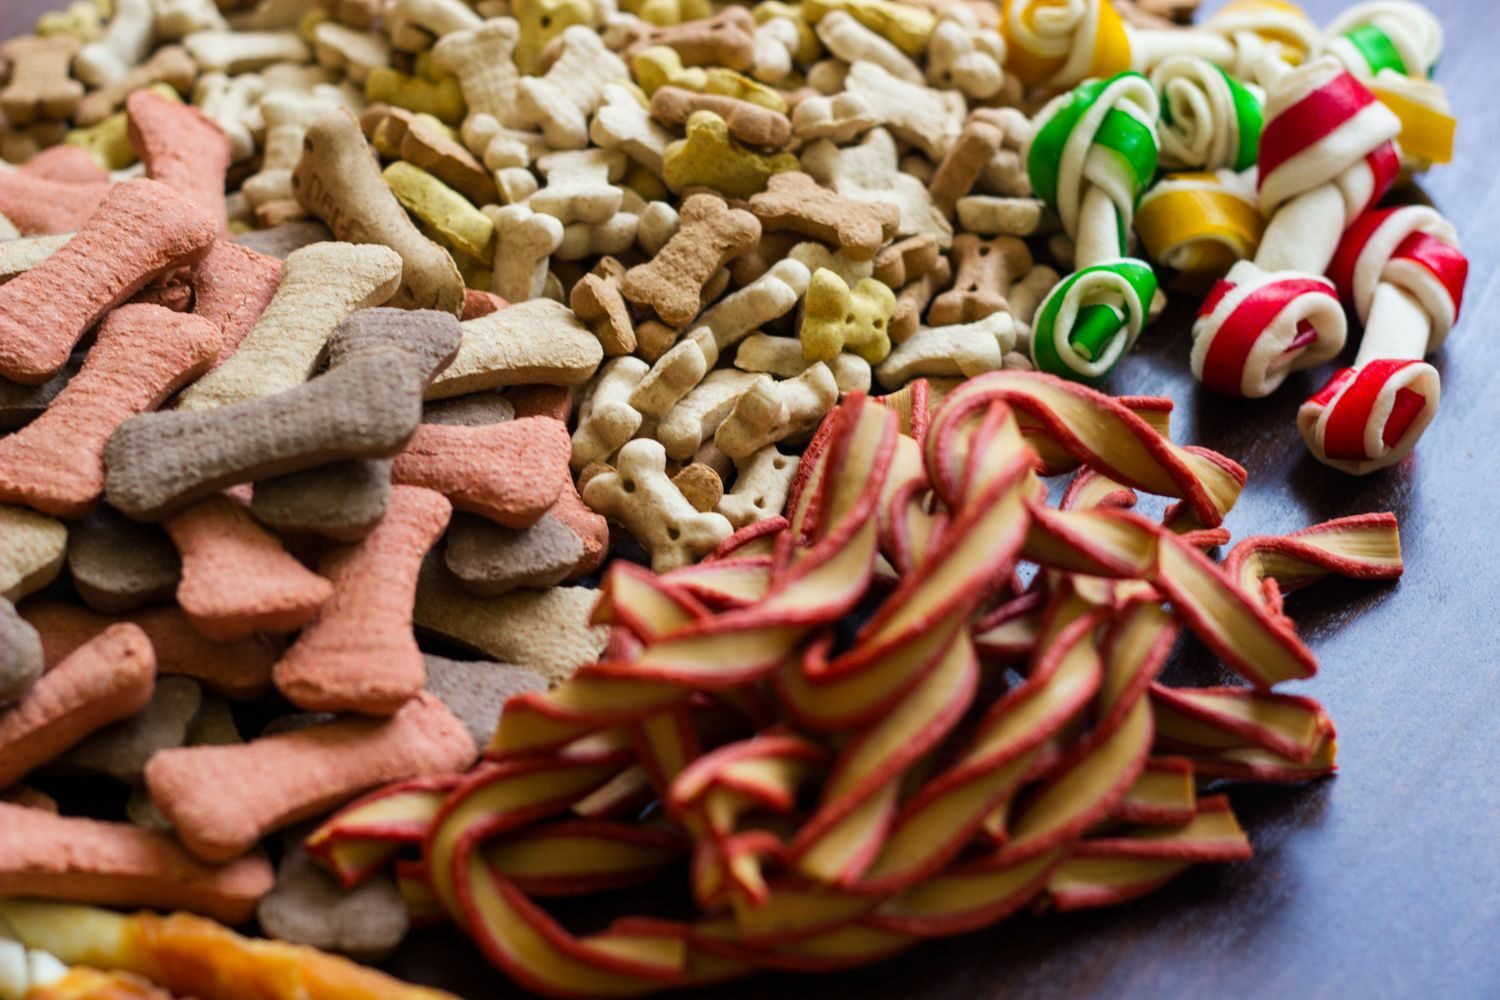 Keep your dog safe at christmas with treats